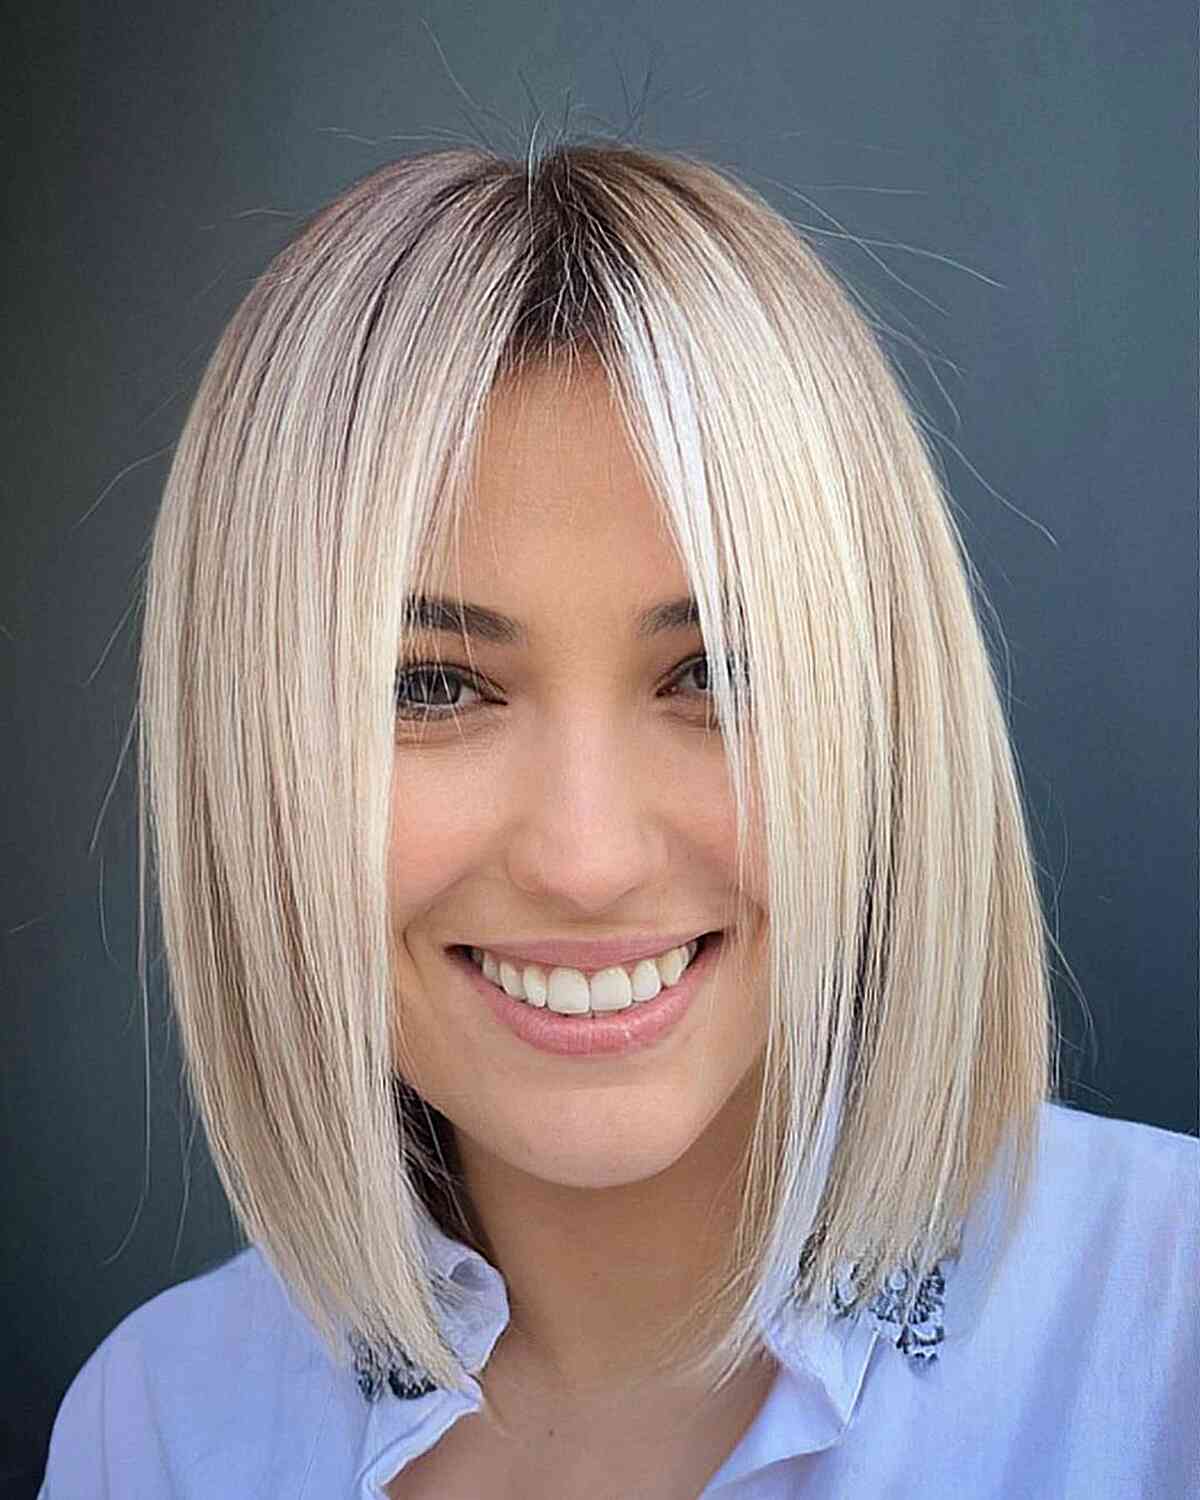 The Perfect Slob Haircut for girls with straight blonde hair